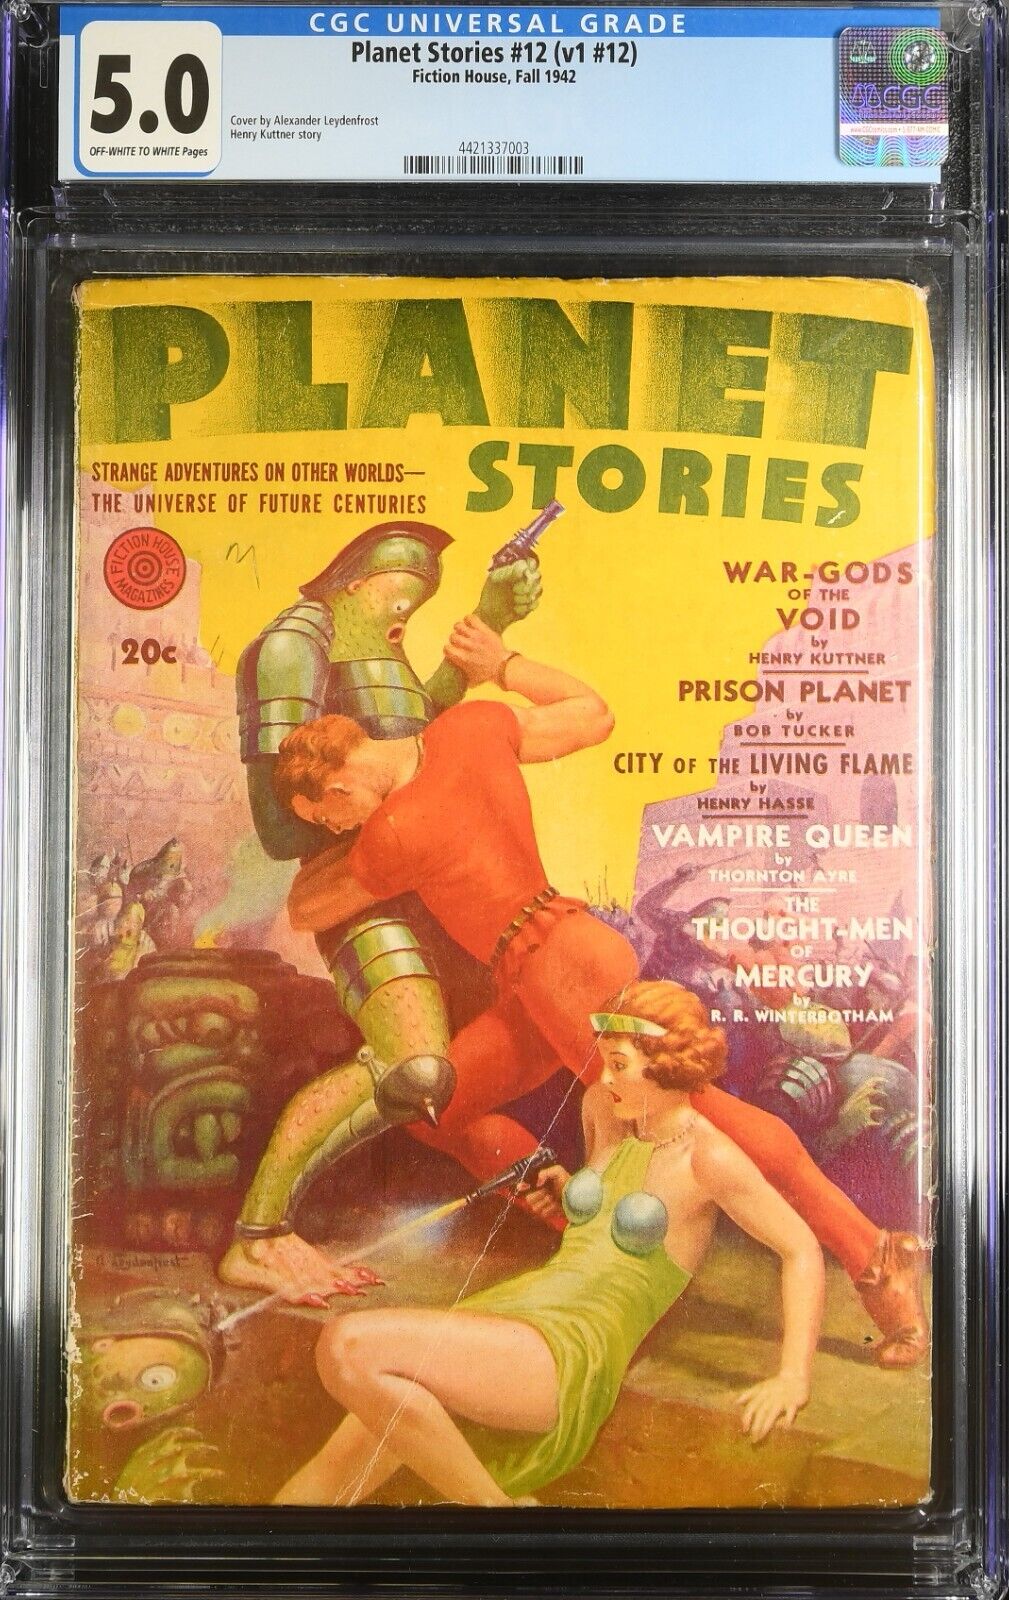 PLANET STORIES #12 (V1 #12) CGC 5.0 FICTION HOUSE FALL 1942 PULP SCI-FI COVER